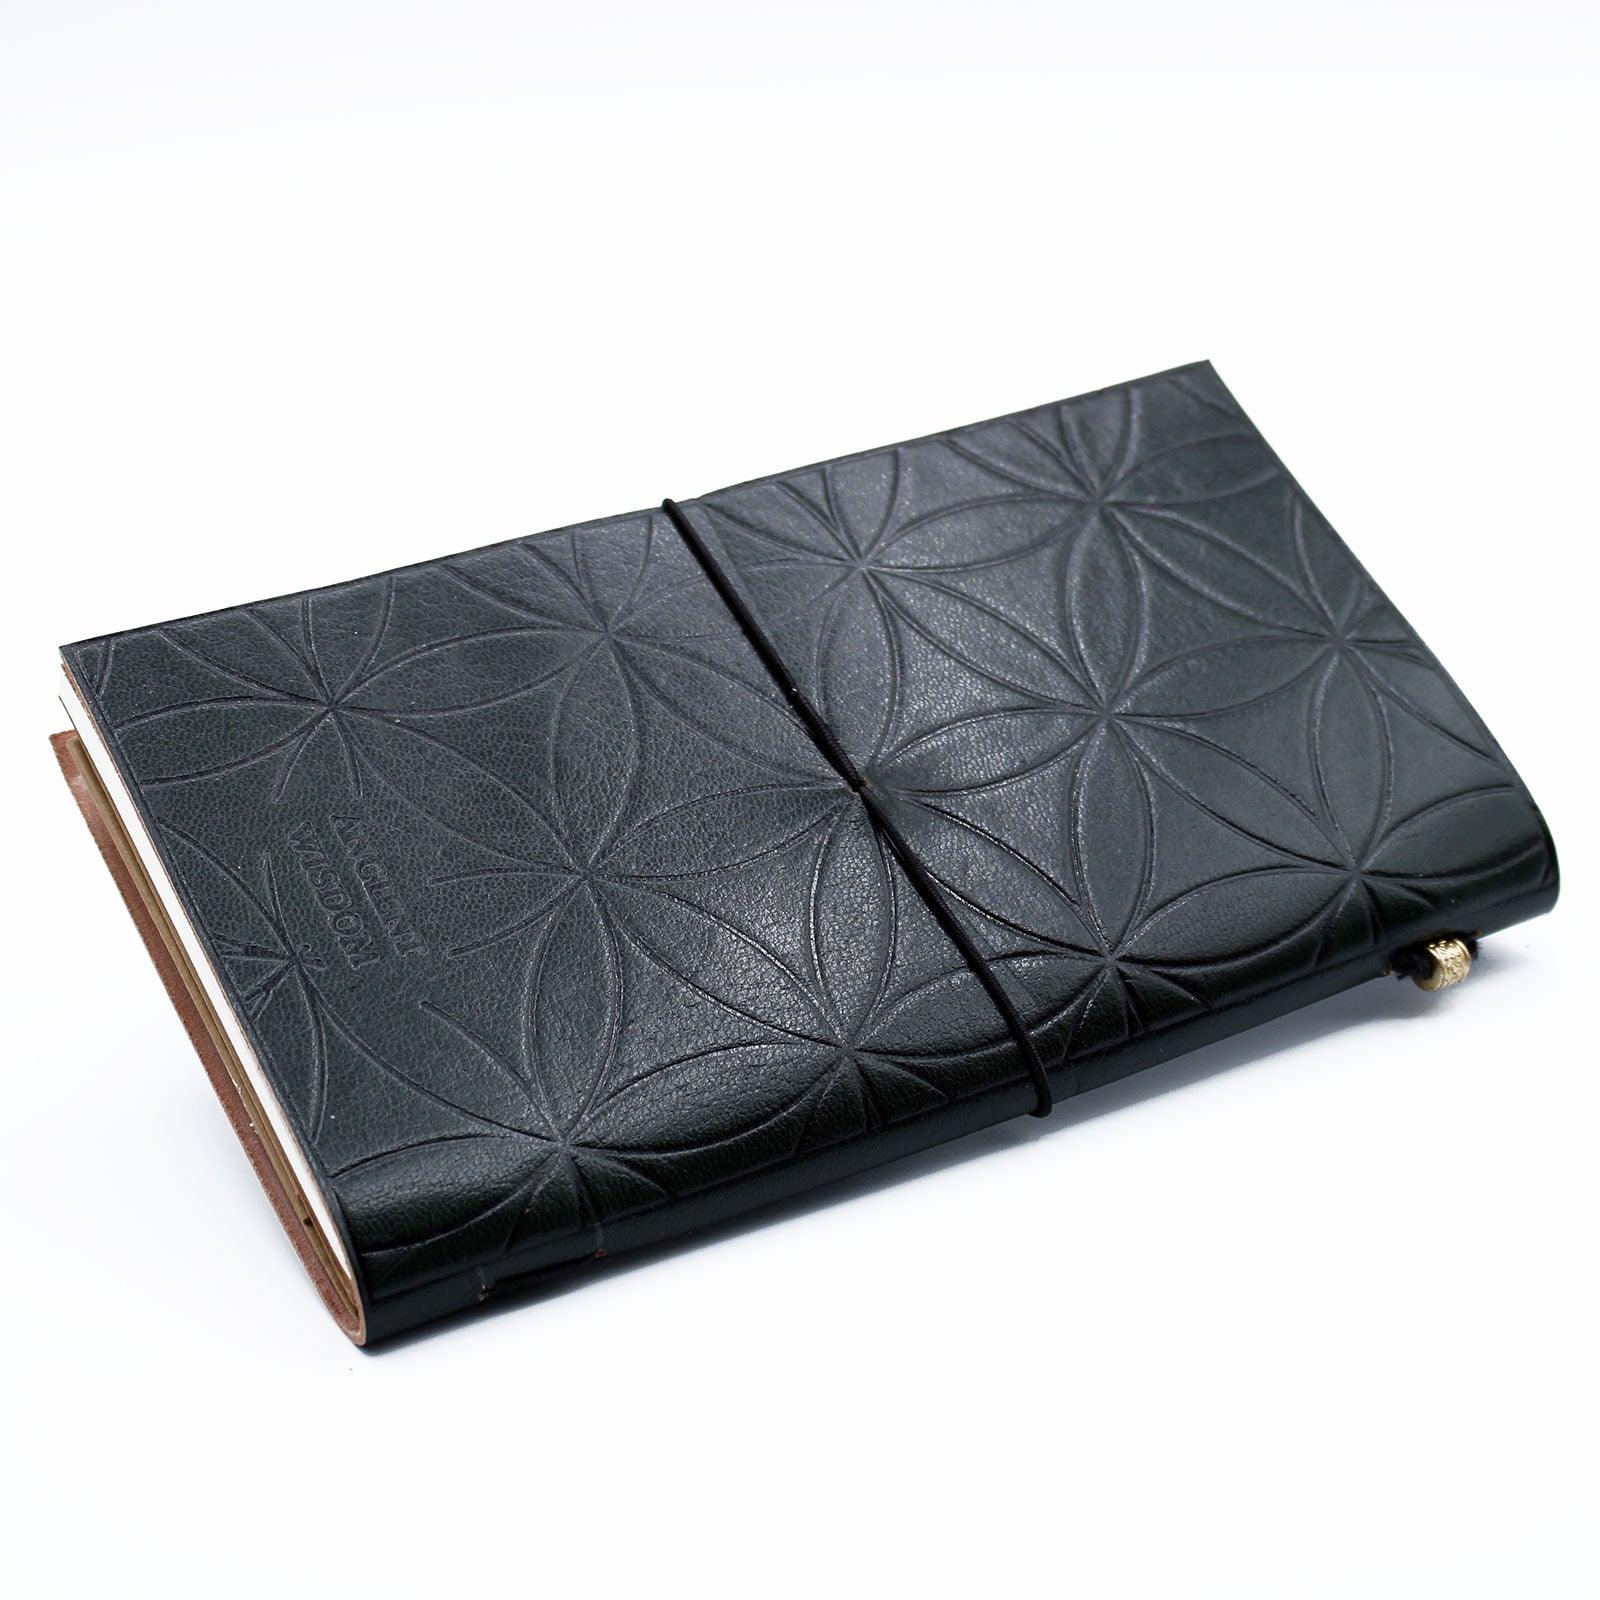 Handmade Leather Journal - Flower of Life - Green (80 pages) - DuvetDay.co.uk